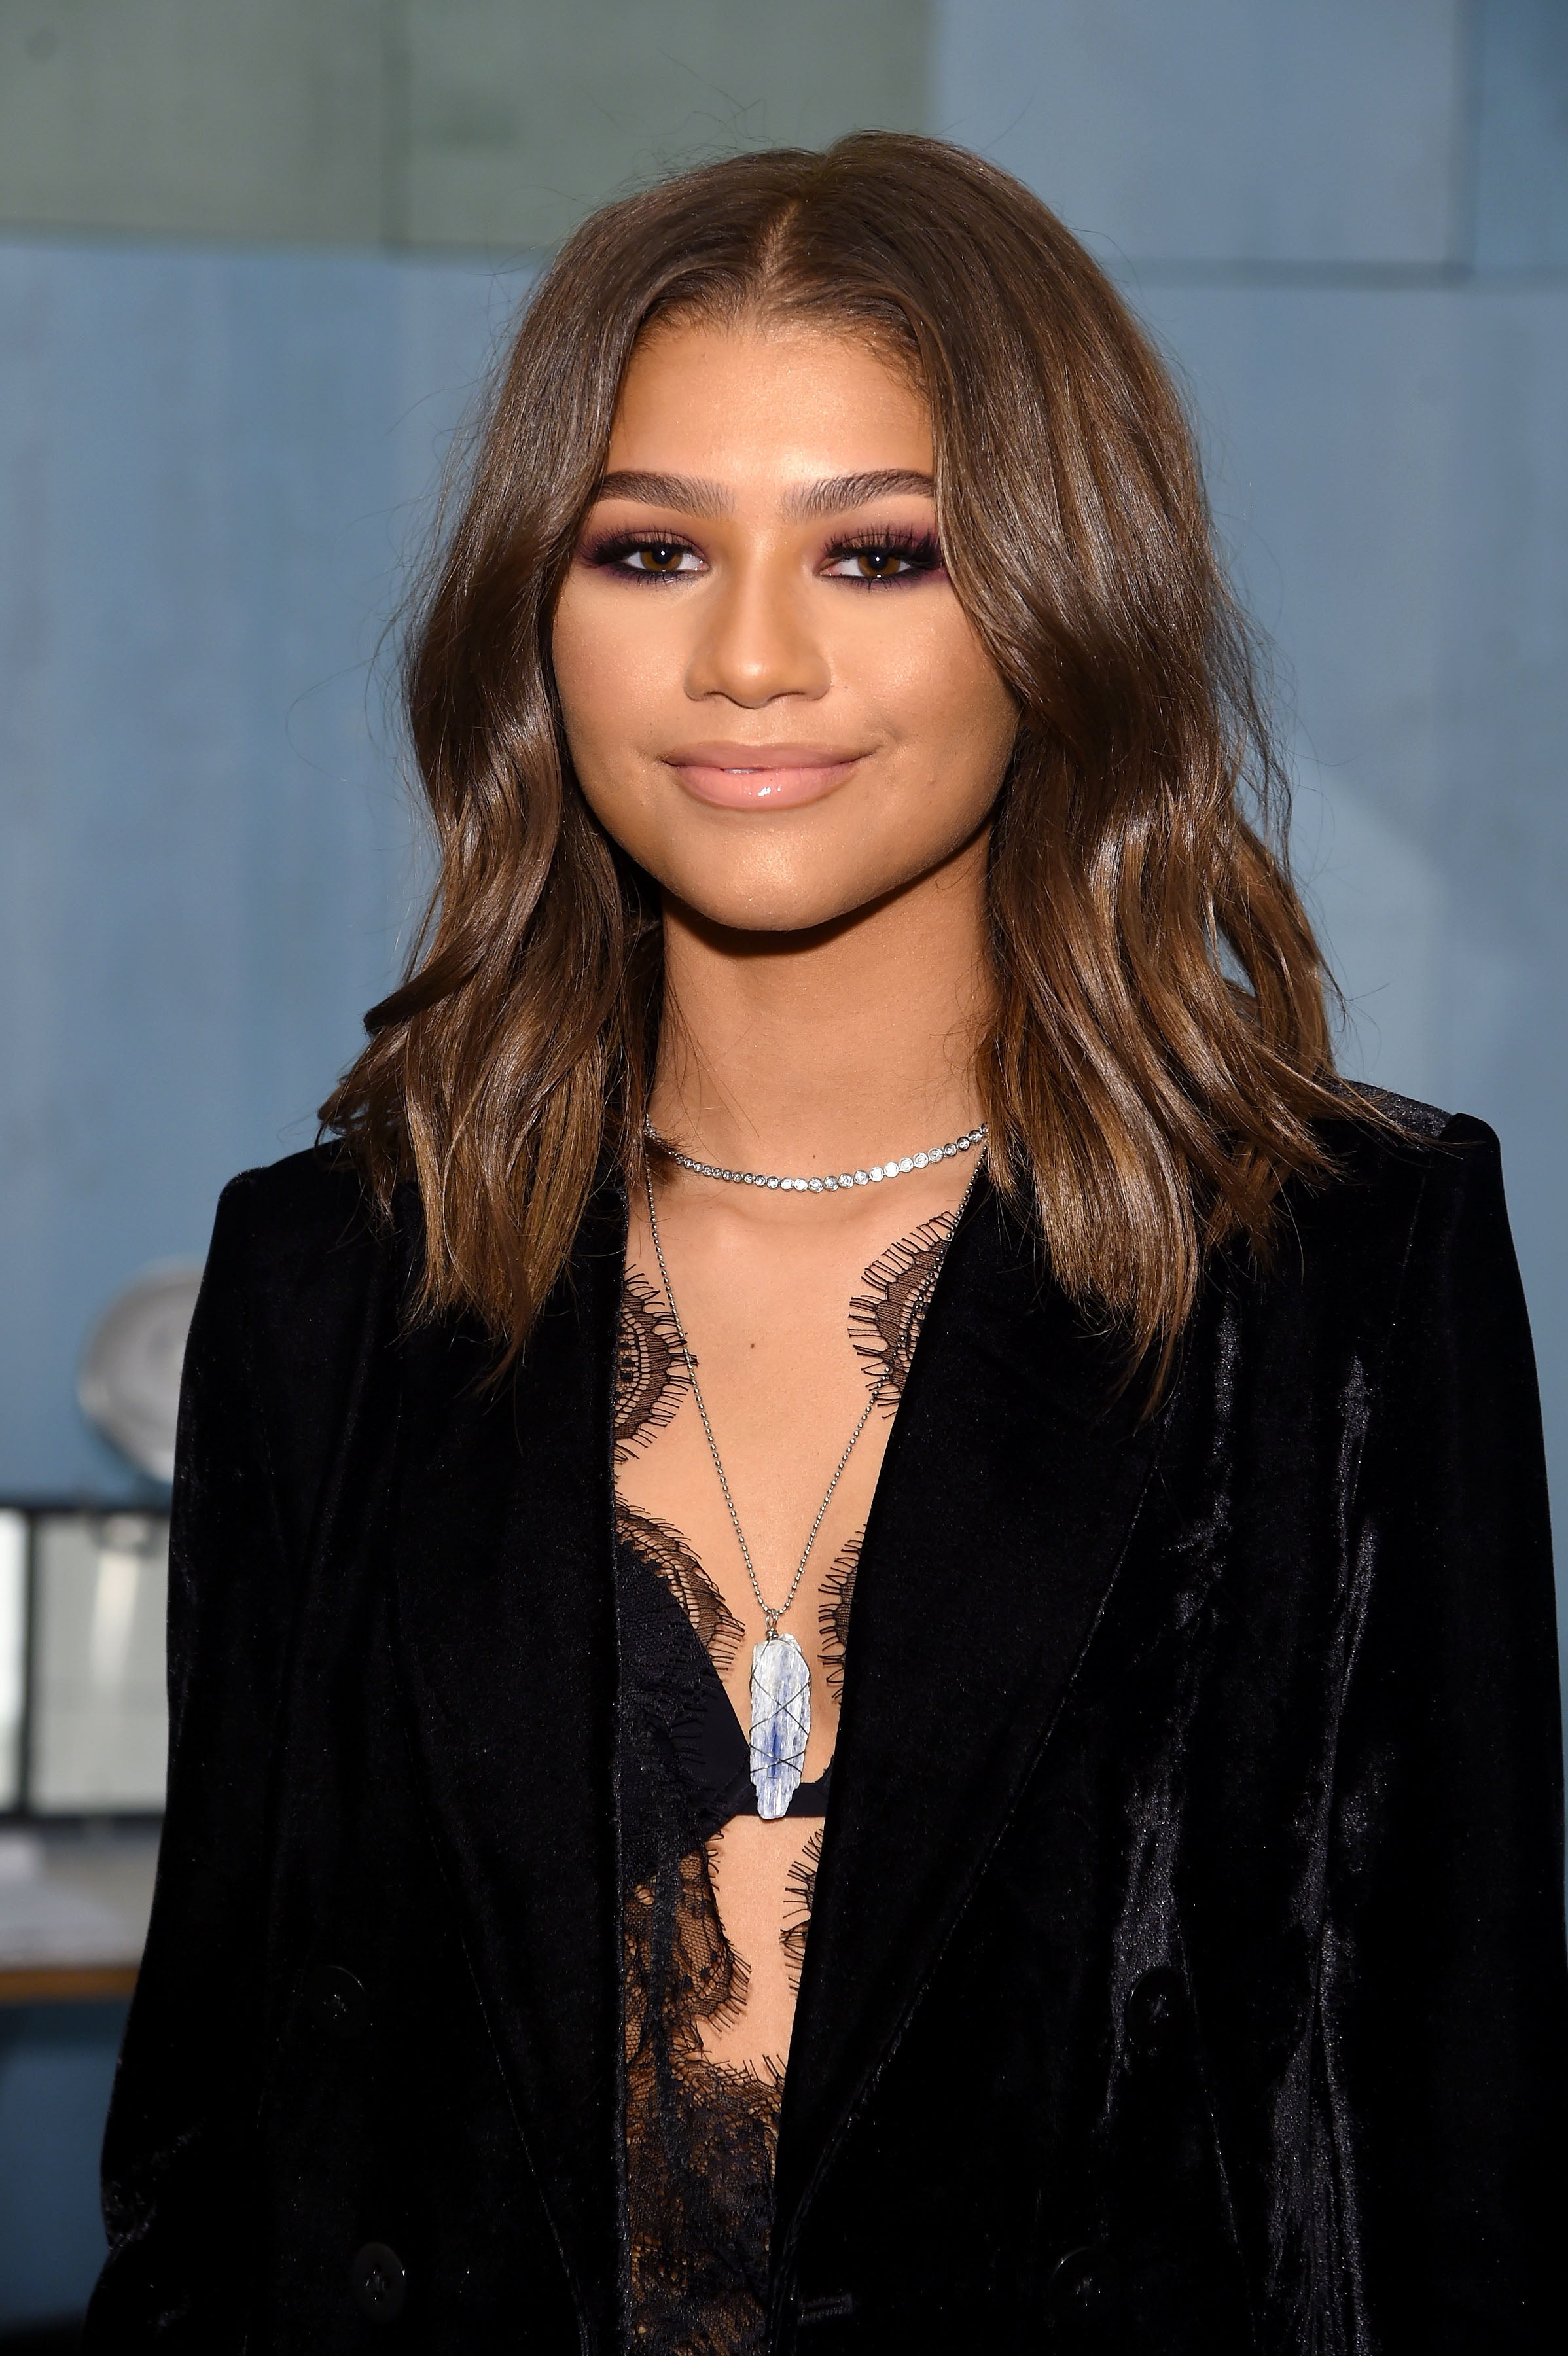 Zendaya on Cameo in Beyoncé's Lemonade: 'I Was a Part of Music History'
